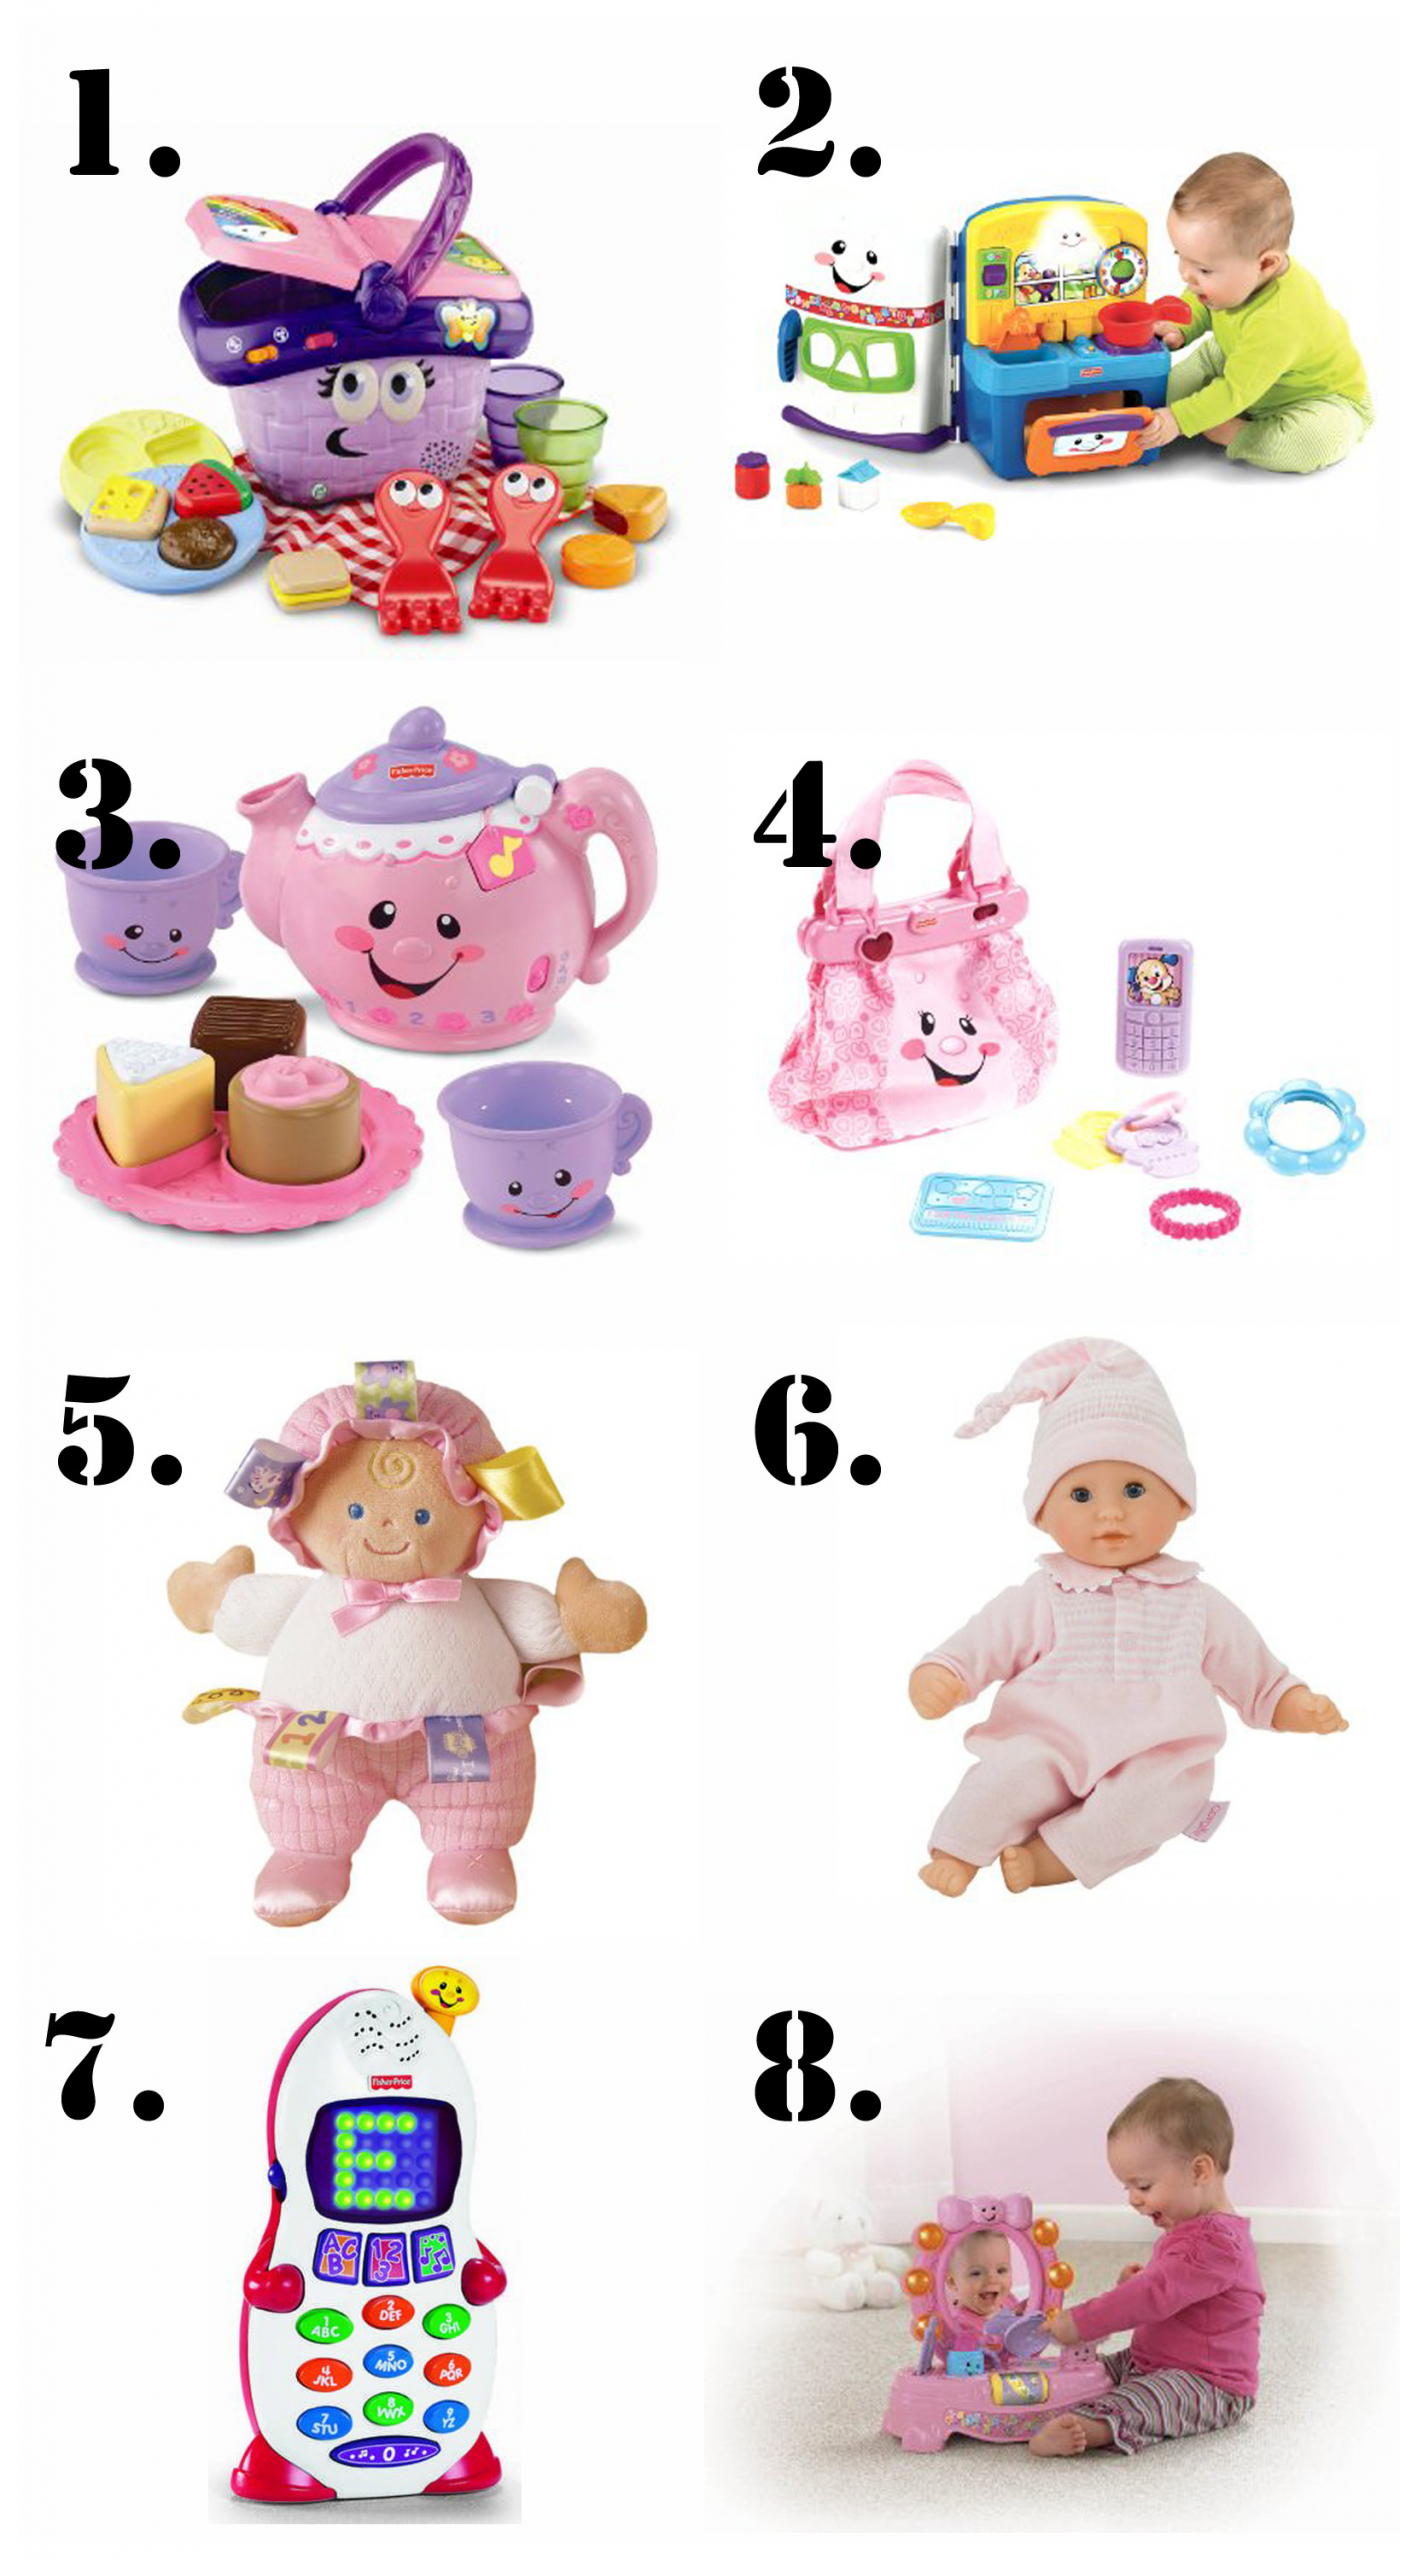 Girl First Birthday Gift Ideas
 best birthday presents for a 1 year old